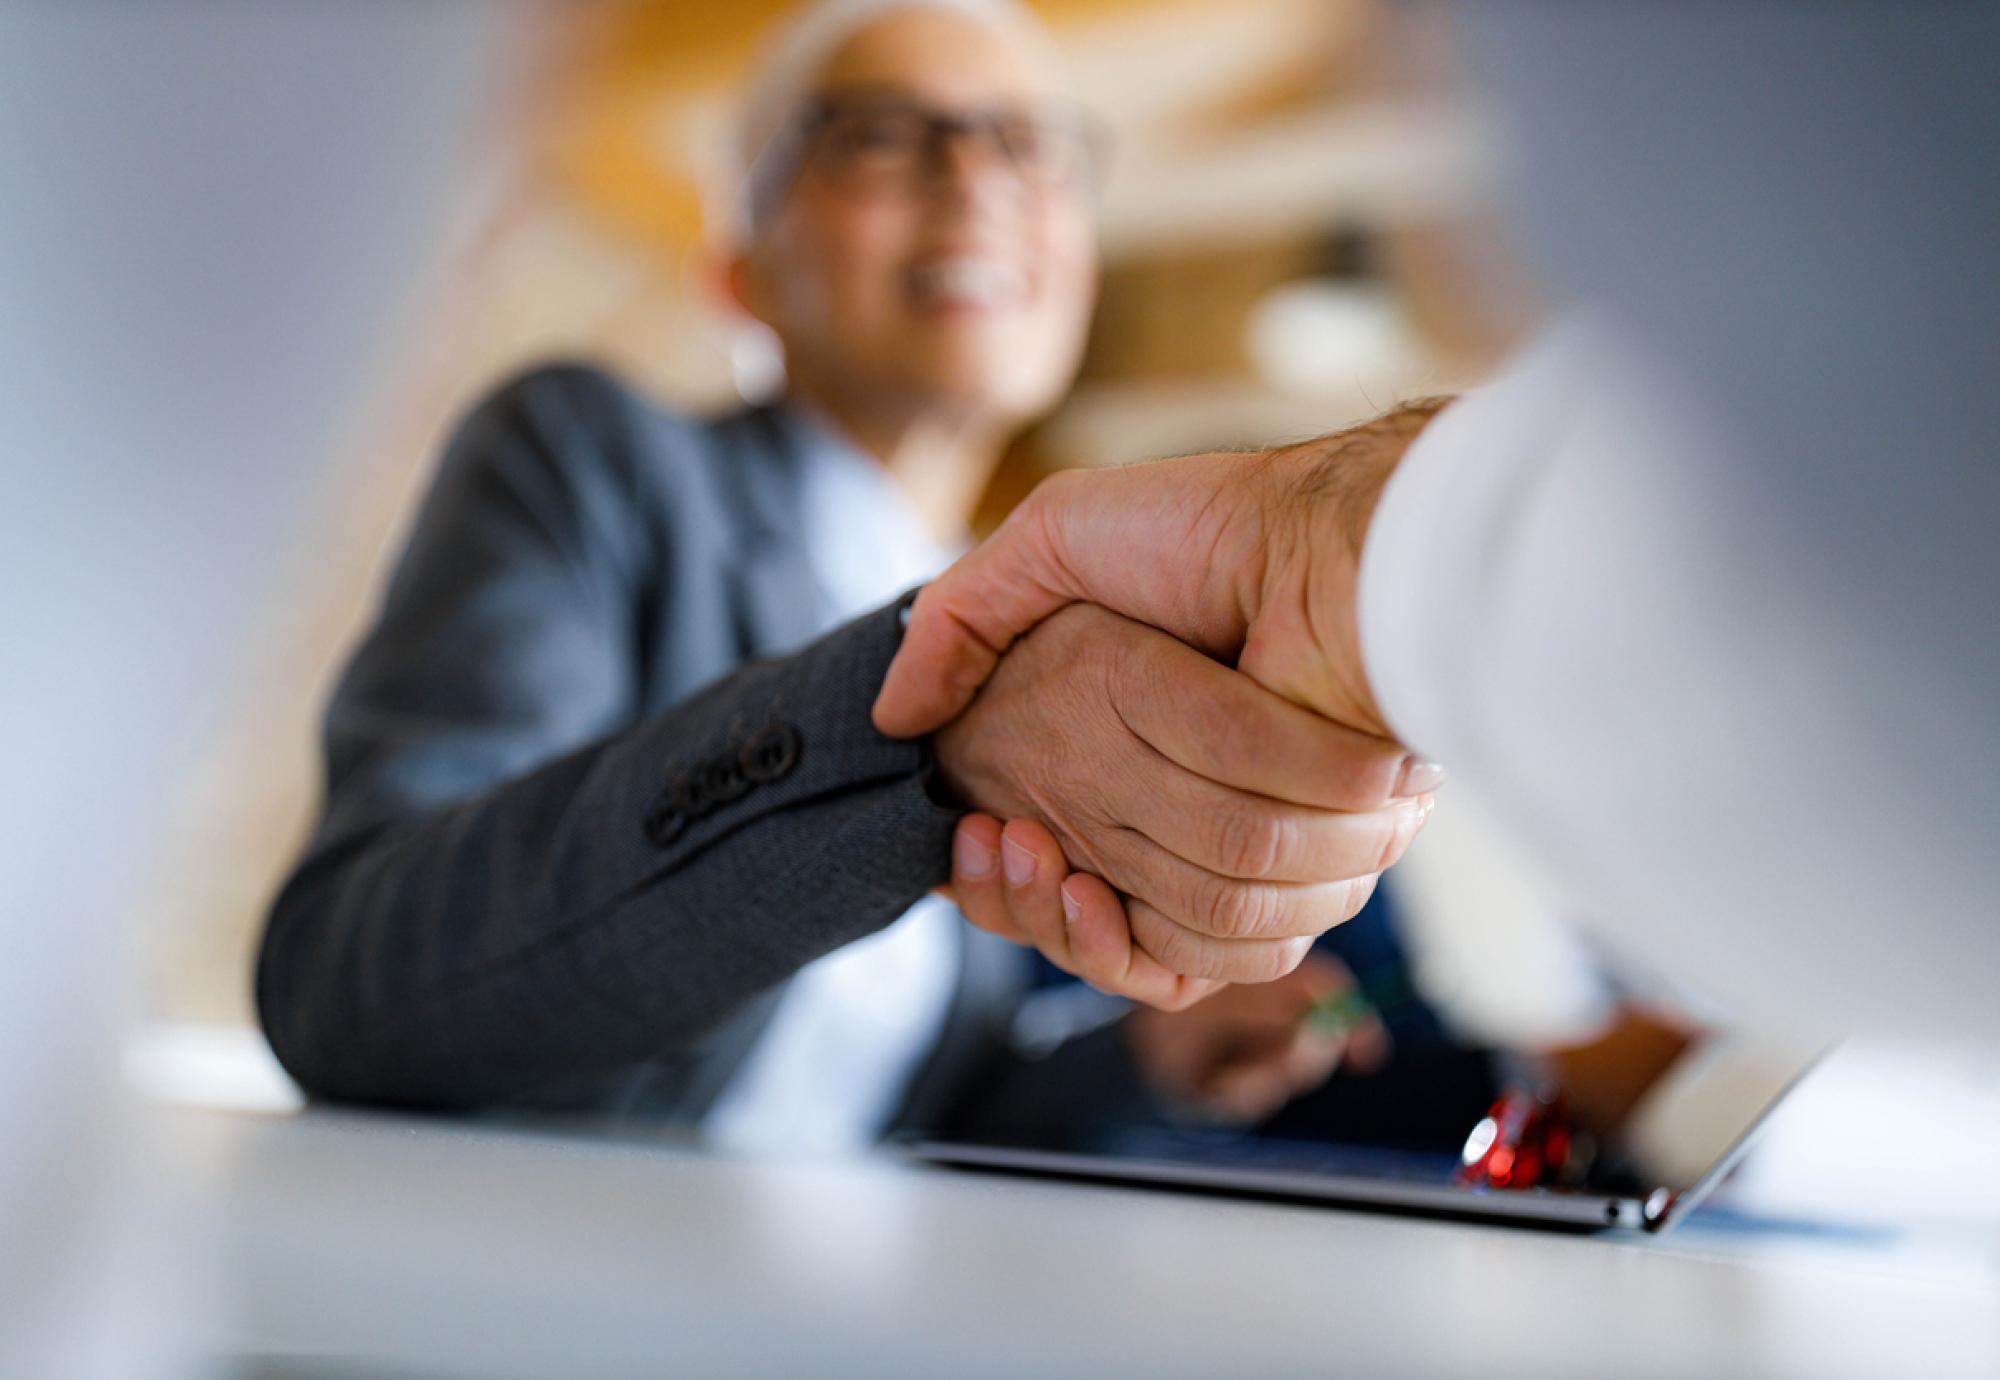 Close up shot of two people shaking hands in a business environment